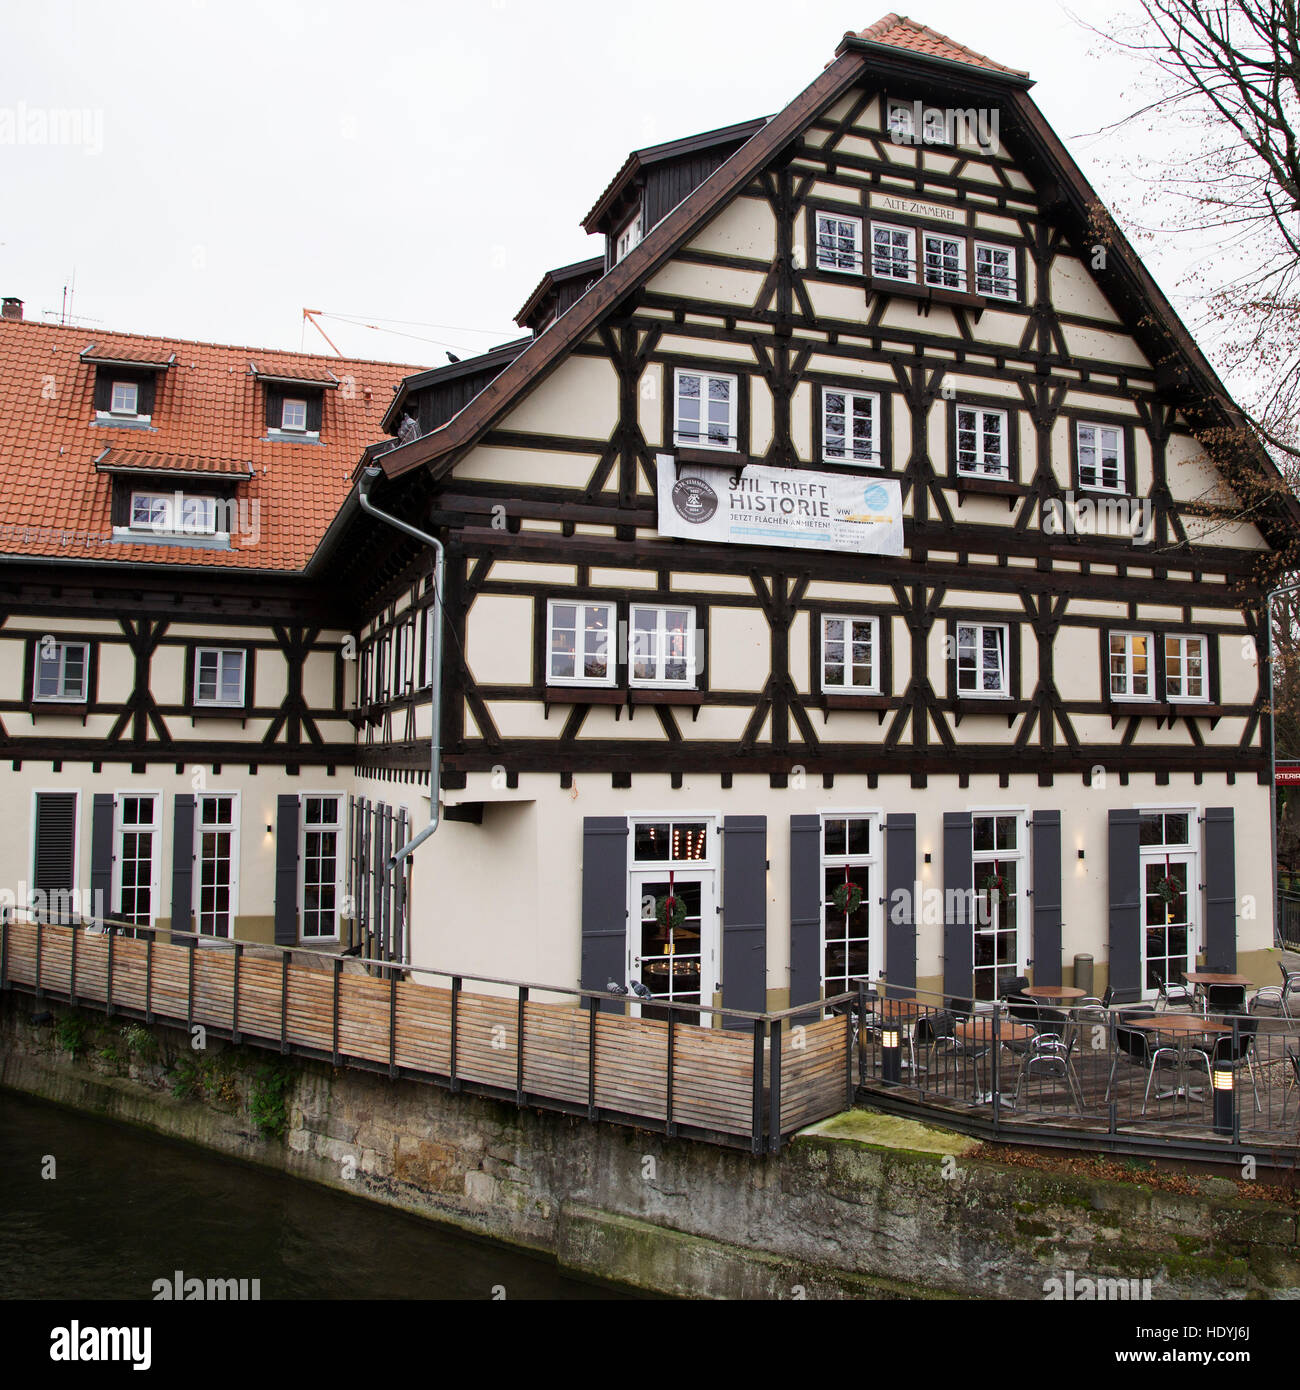 The riverside Alte Zimmerei building in Esslingen, Germany. The city is renowned for its timber-framed, medieval houses. Stock Photo